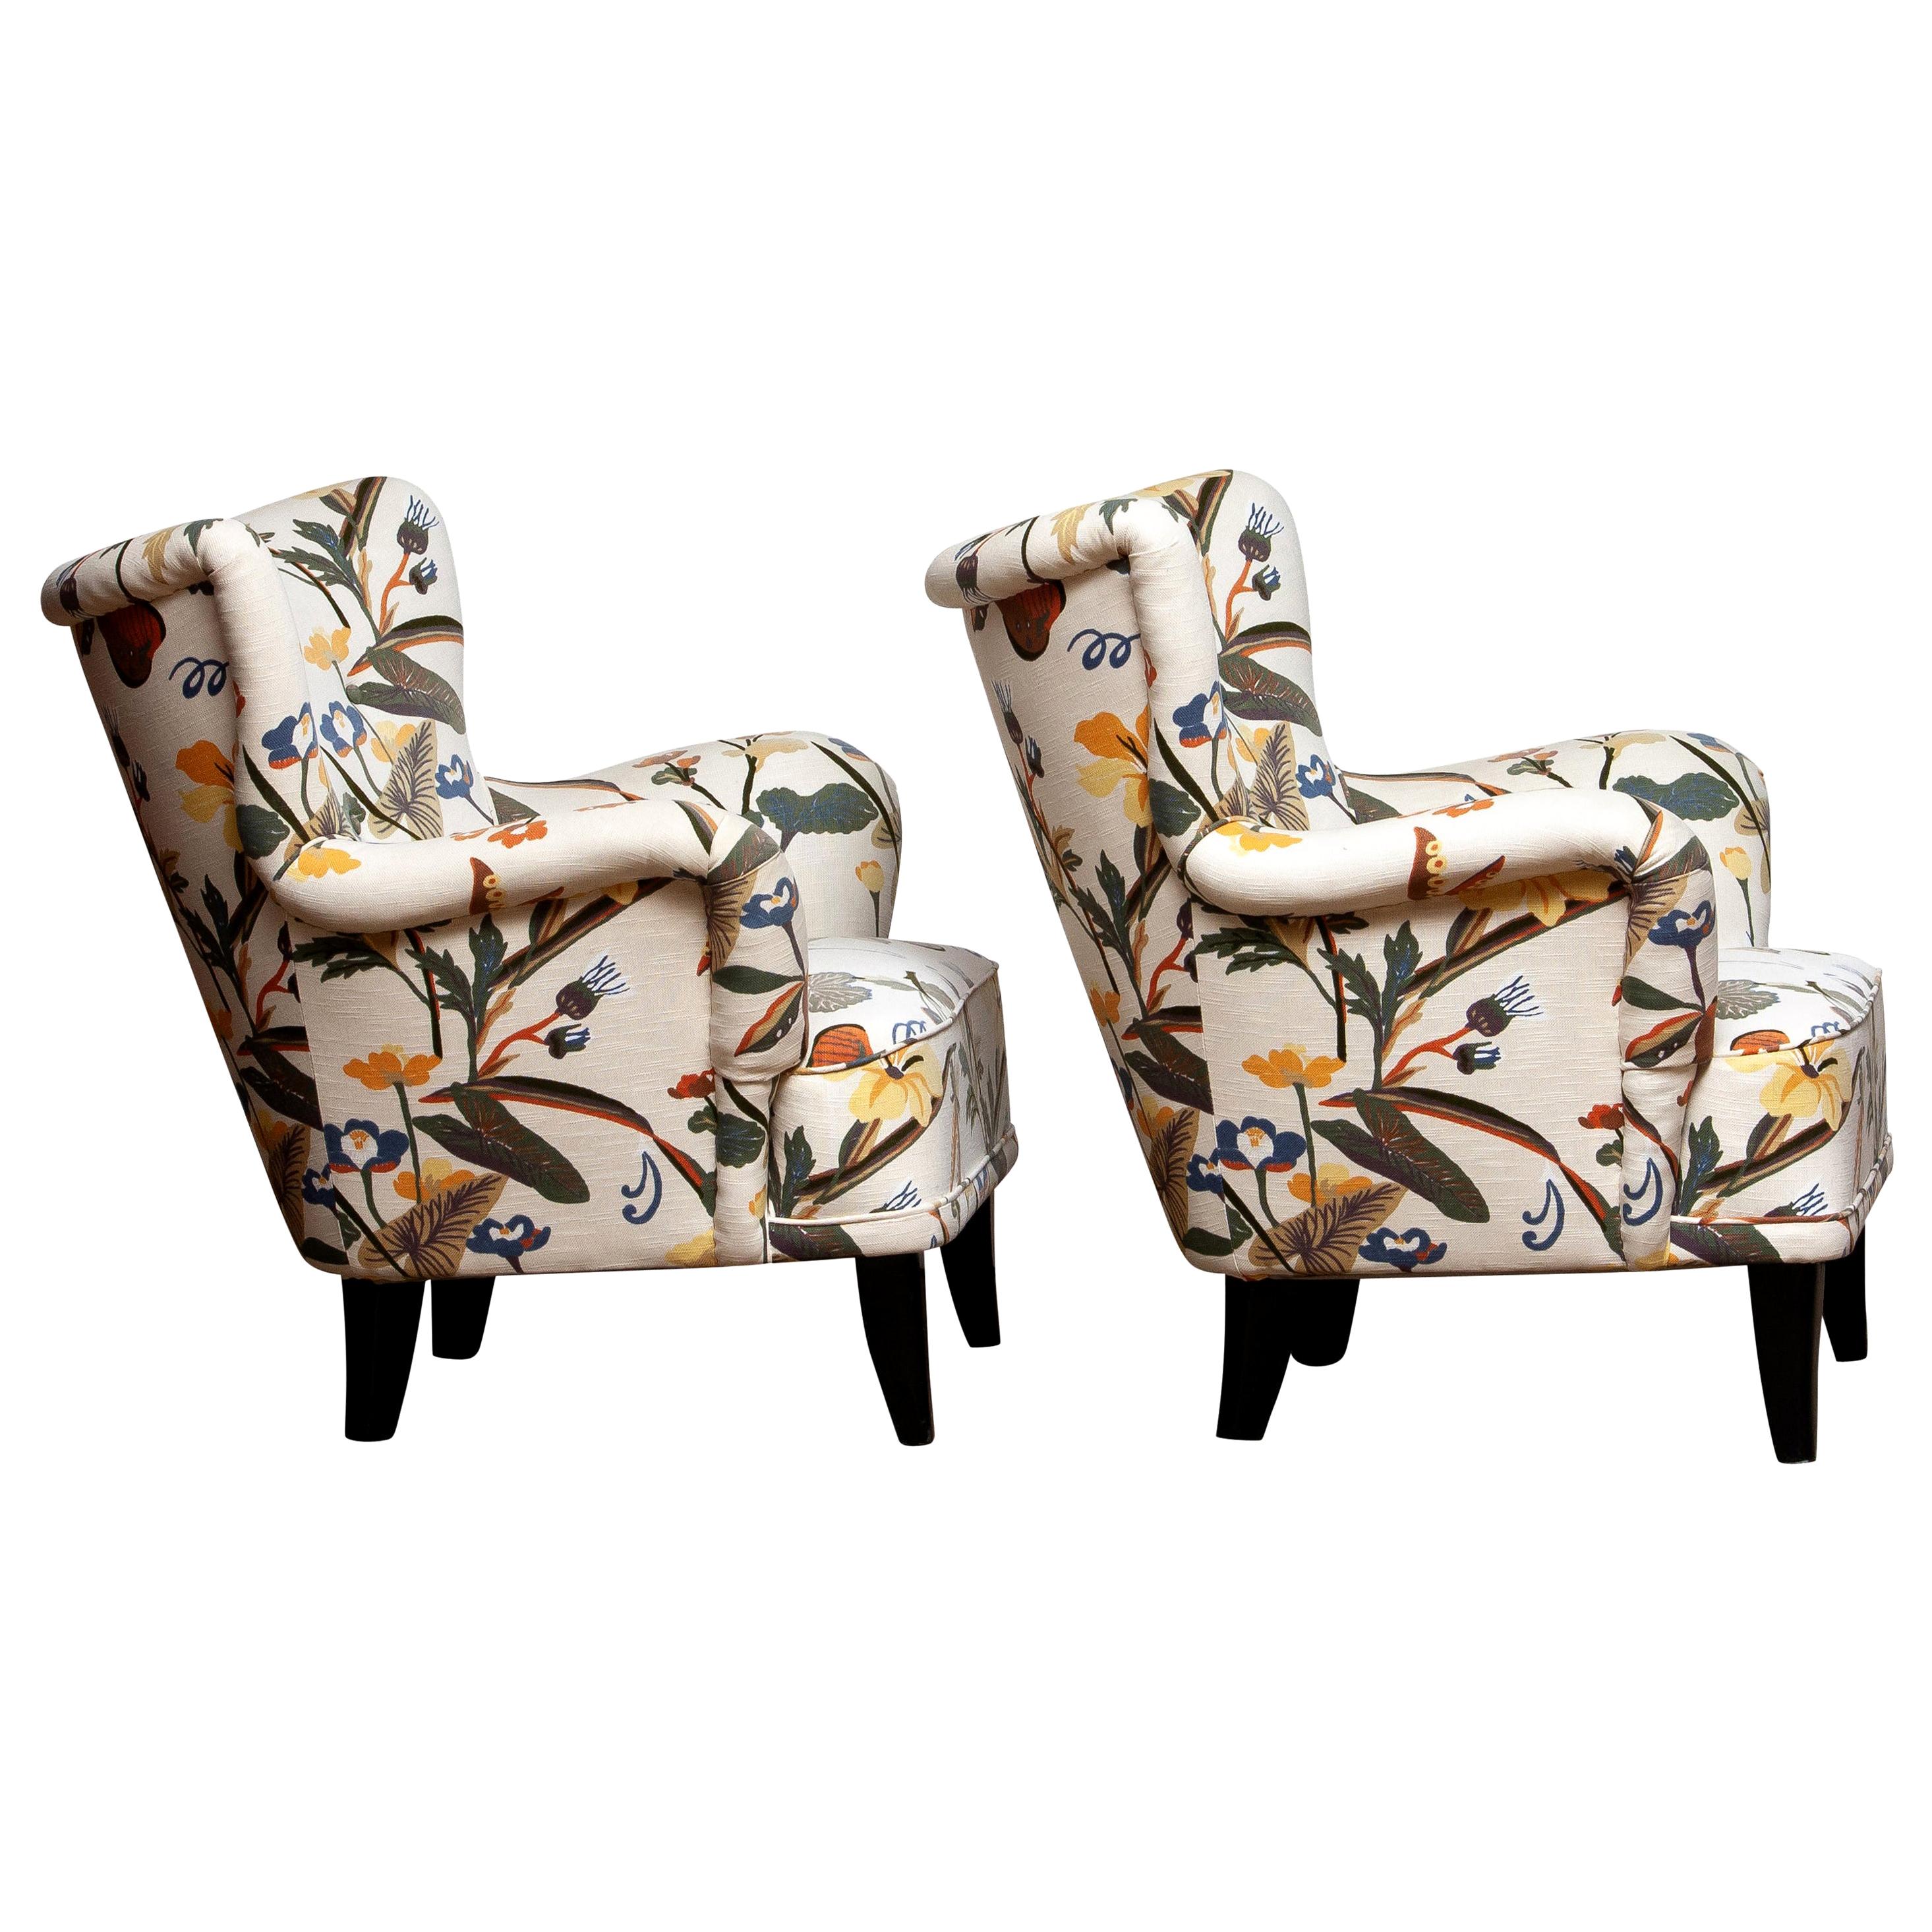 Set of two beautiful 1940s-1950s lounge / club chairs reupholstered, in a later period, with the typical floral print fabric designed by Josef Frank.
The chairs are designed by Ilmari Lappalainen for Asko in Finland
The overall condition is good.